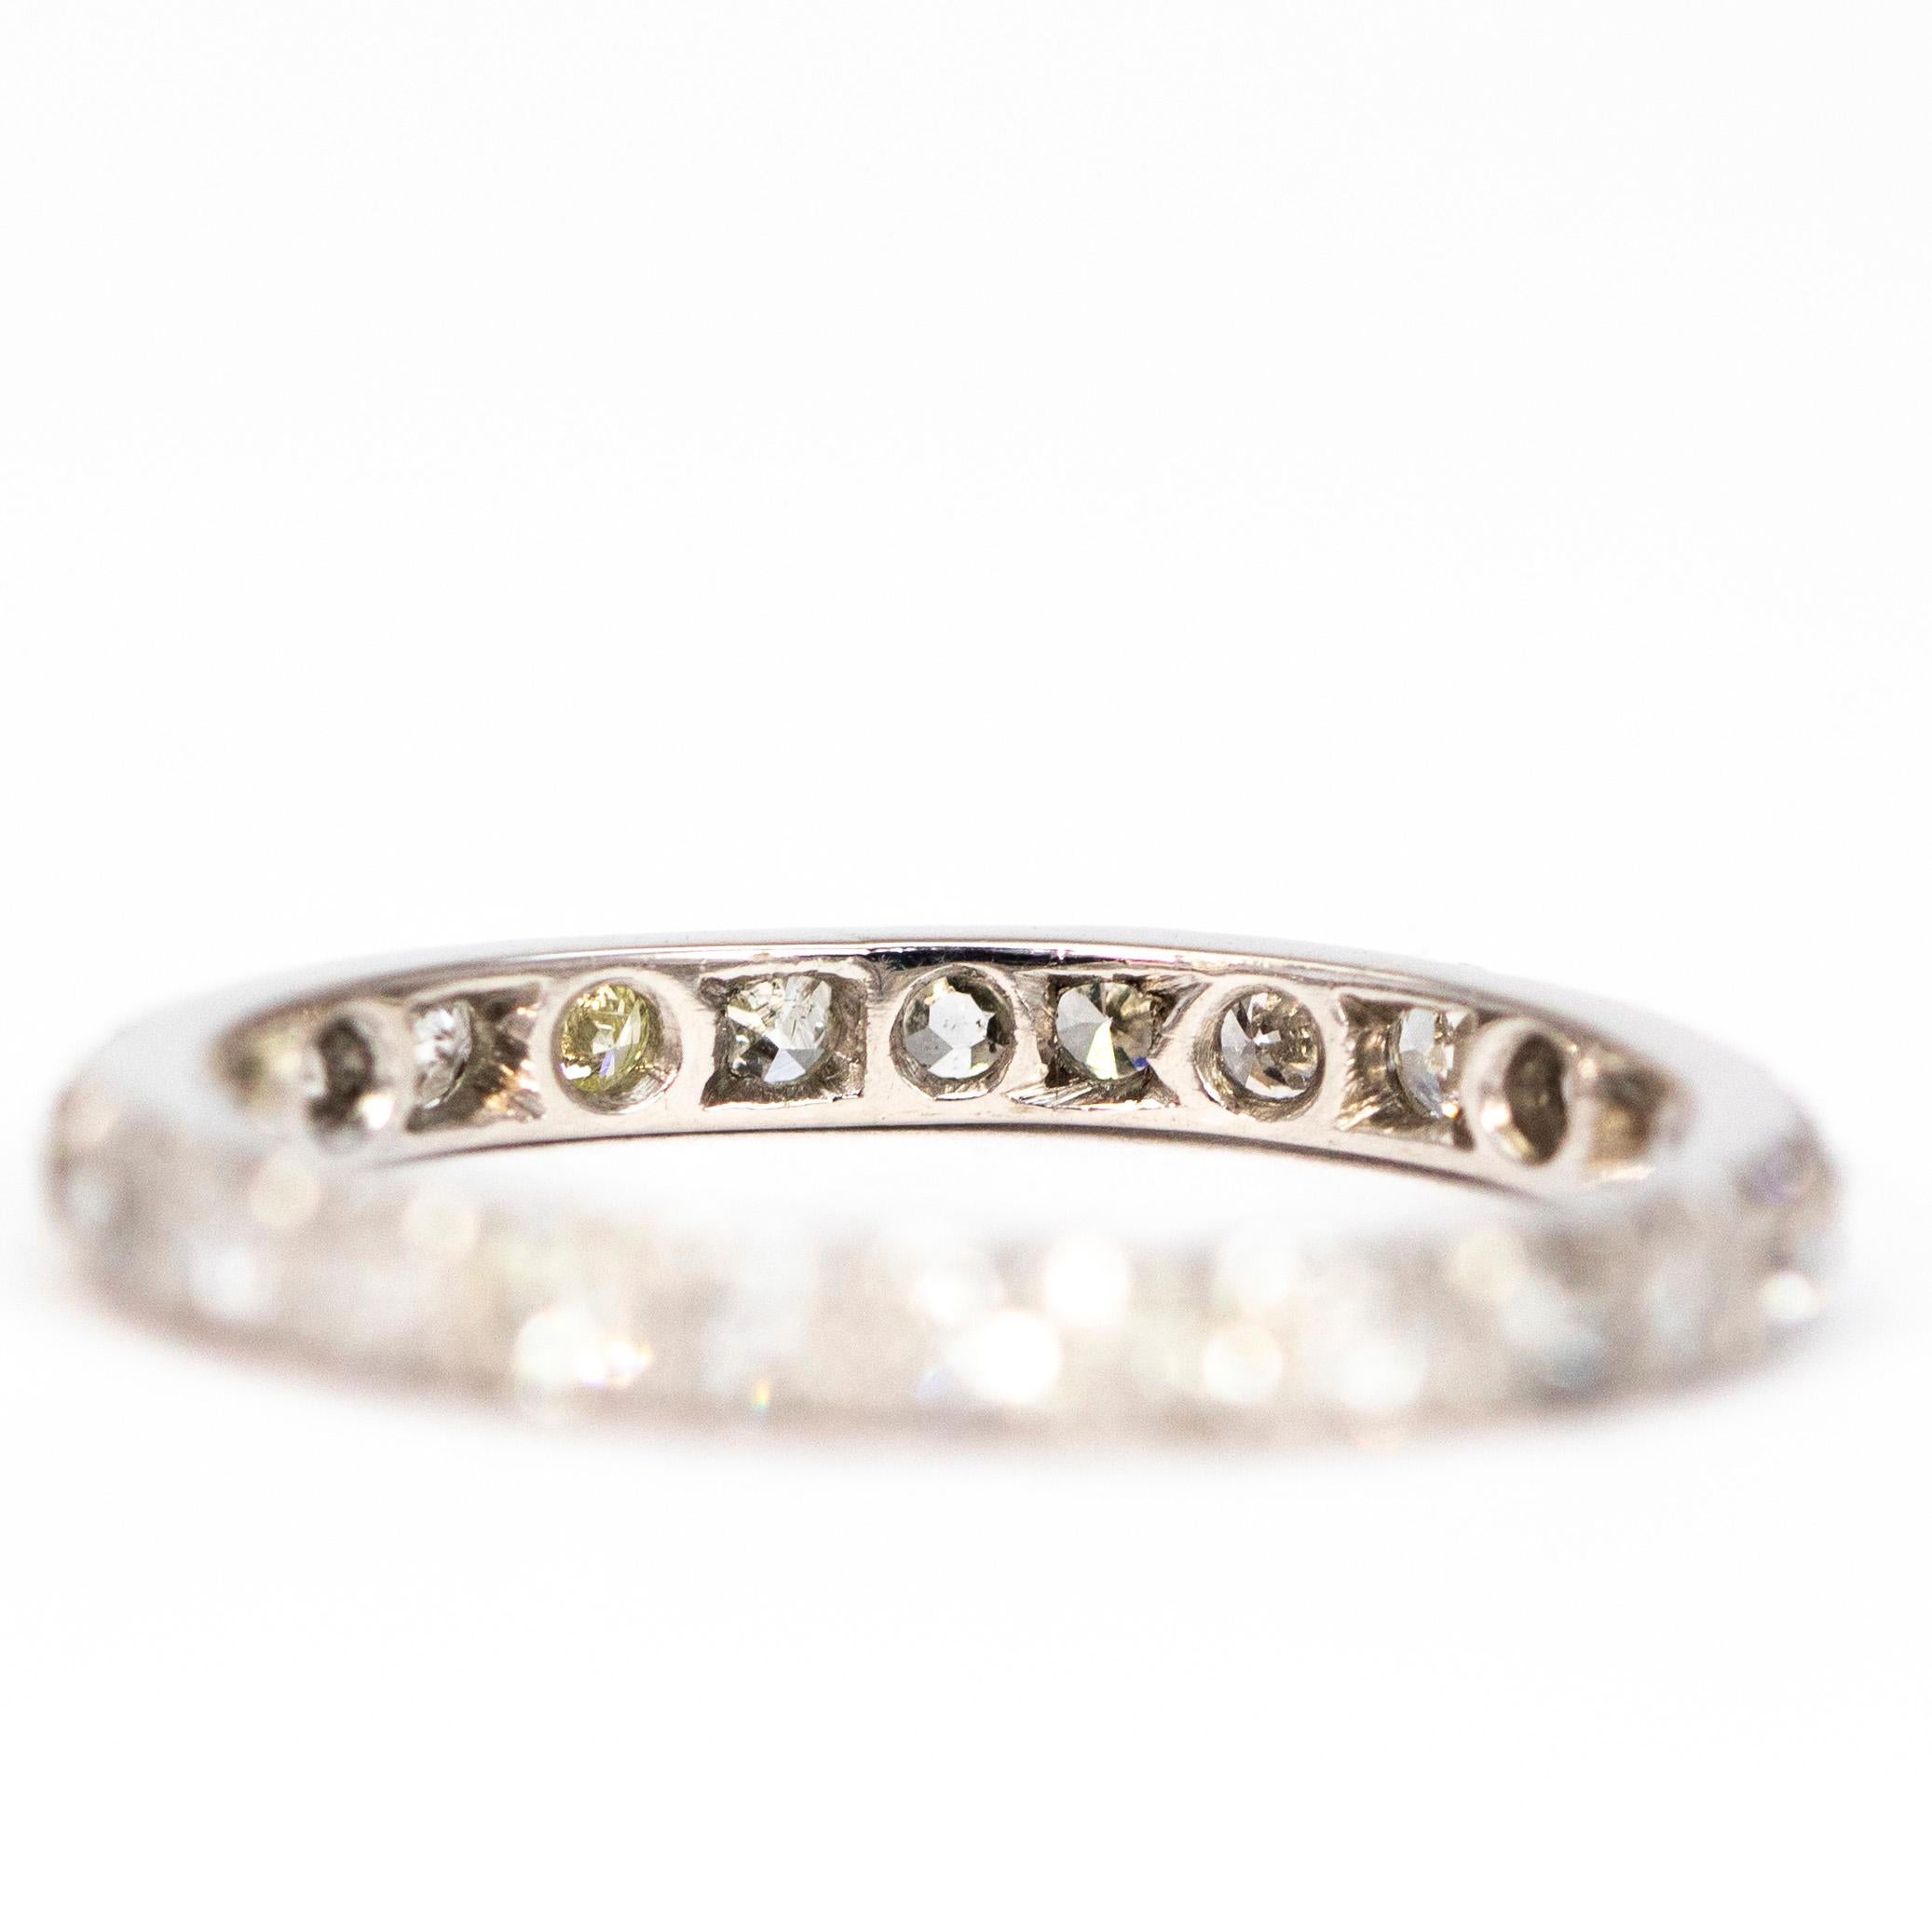 This shimmering eternity band holds diamonds which measure 5pts each and have the most wonderful sparkle. The diamonds are set within the band which is modelled in platinum.

Ring Size: Q or 8 1/4
Band Width: 2.5mm

Weight: 3g